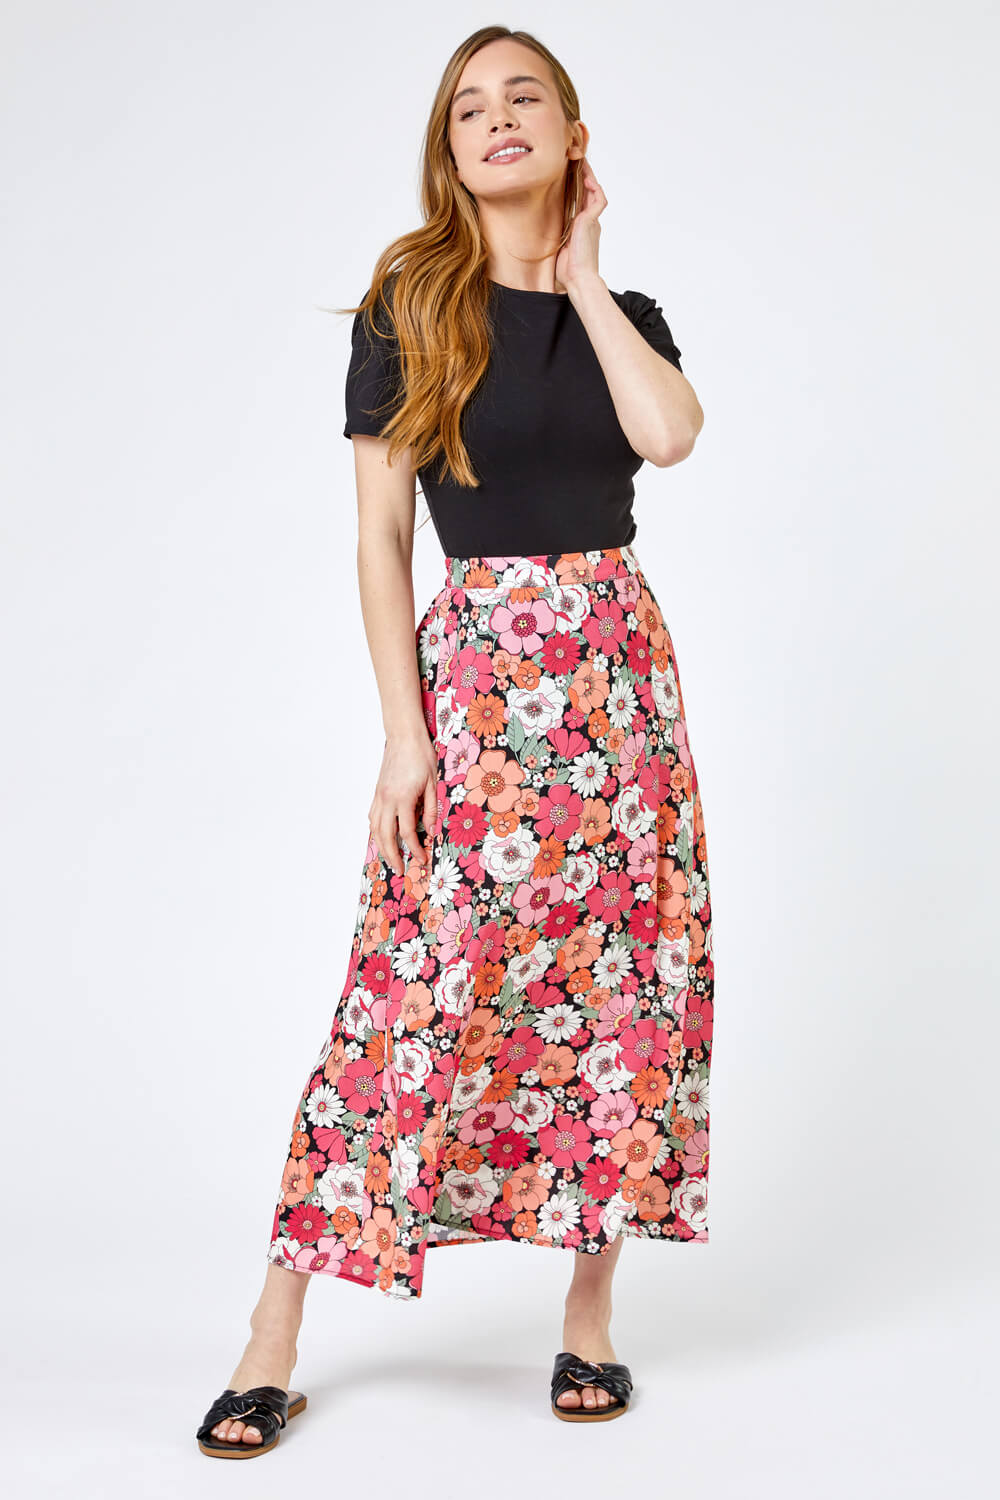 CORAL Petite Floral Print A-Line Skirt, Image 3 of 4